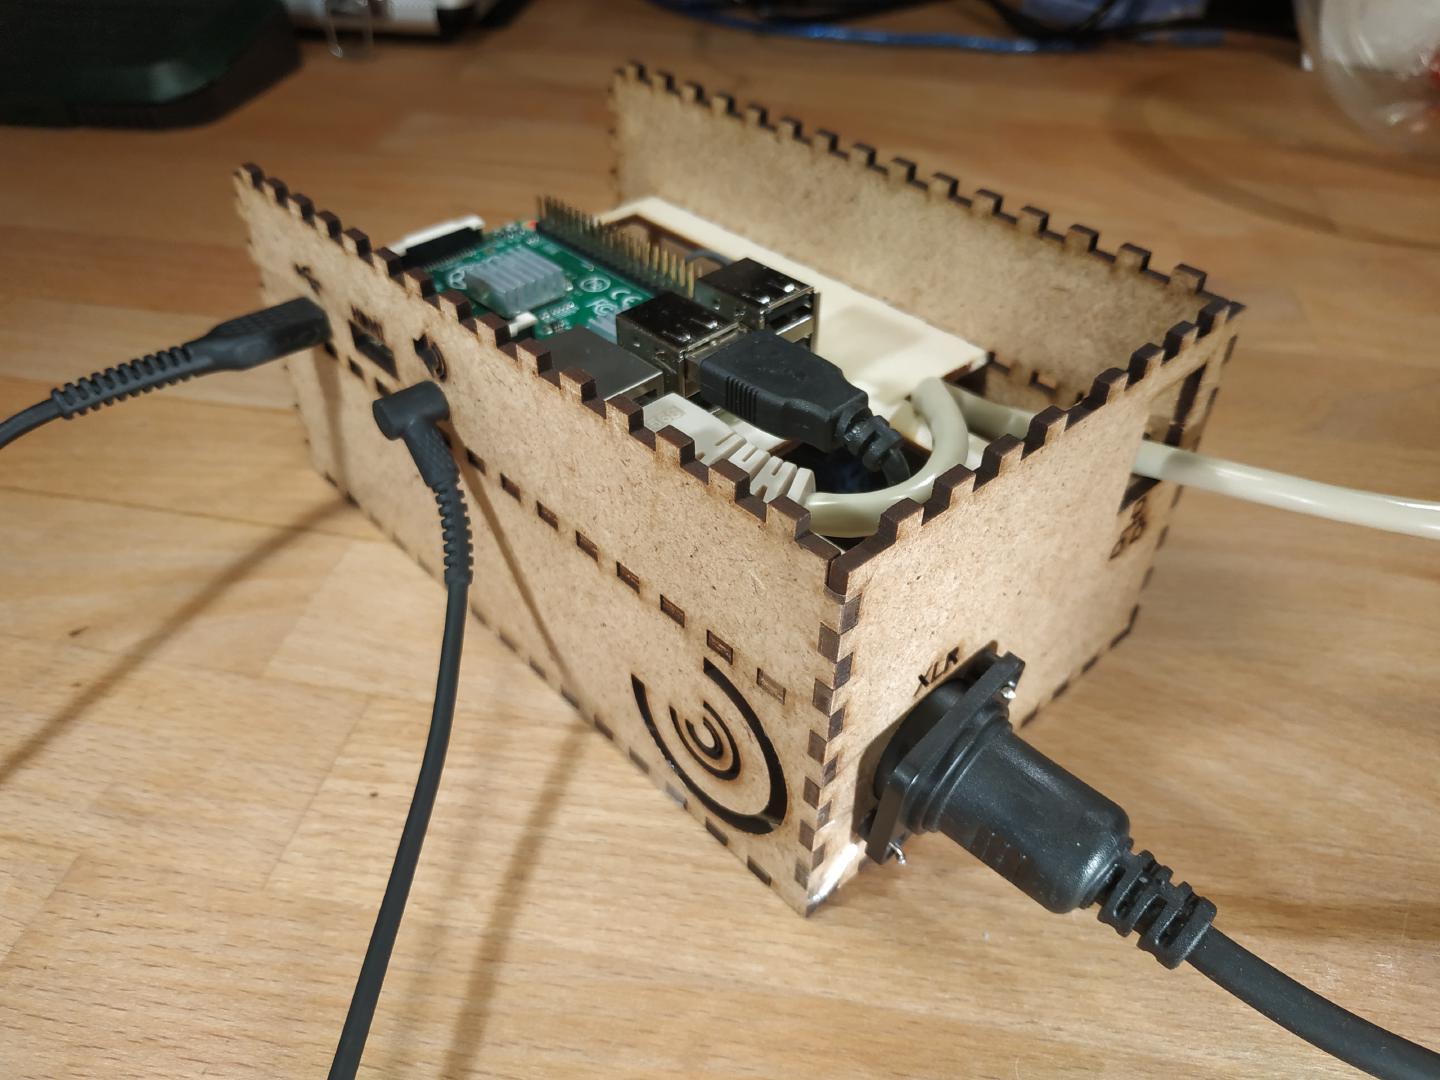 Photo of the device we ended up presenting during the hackathon.